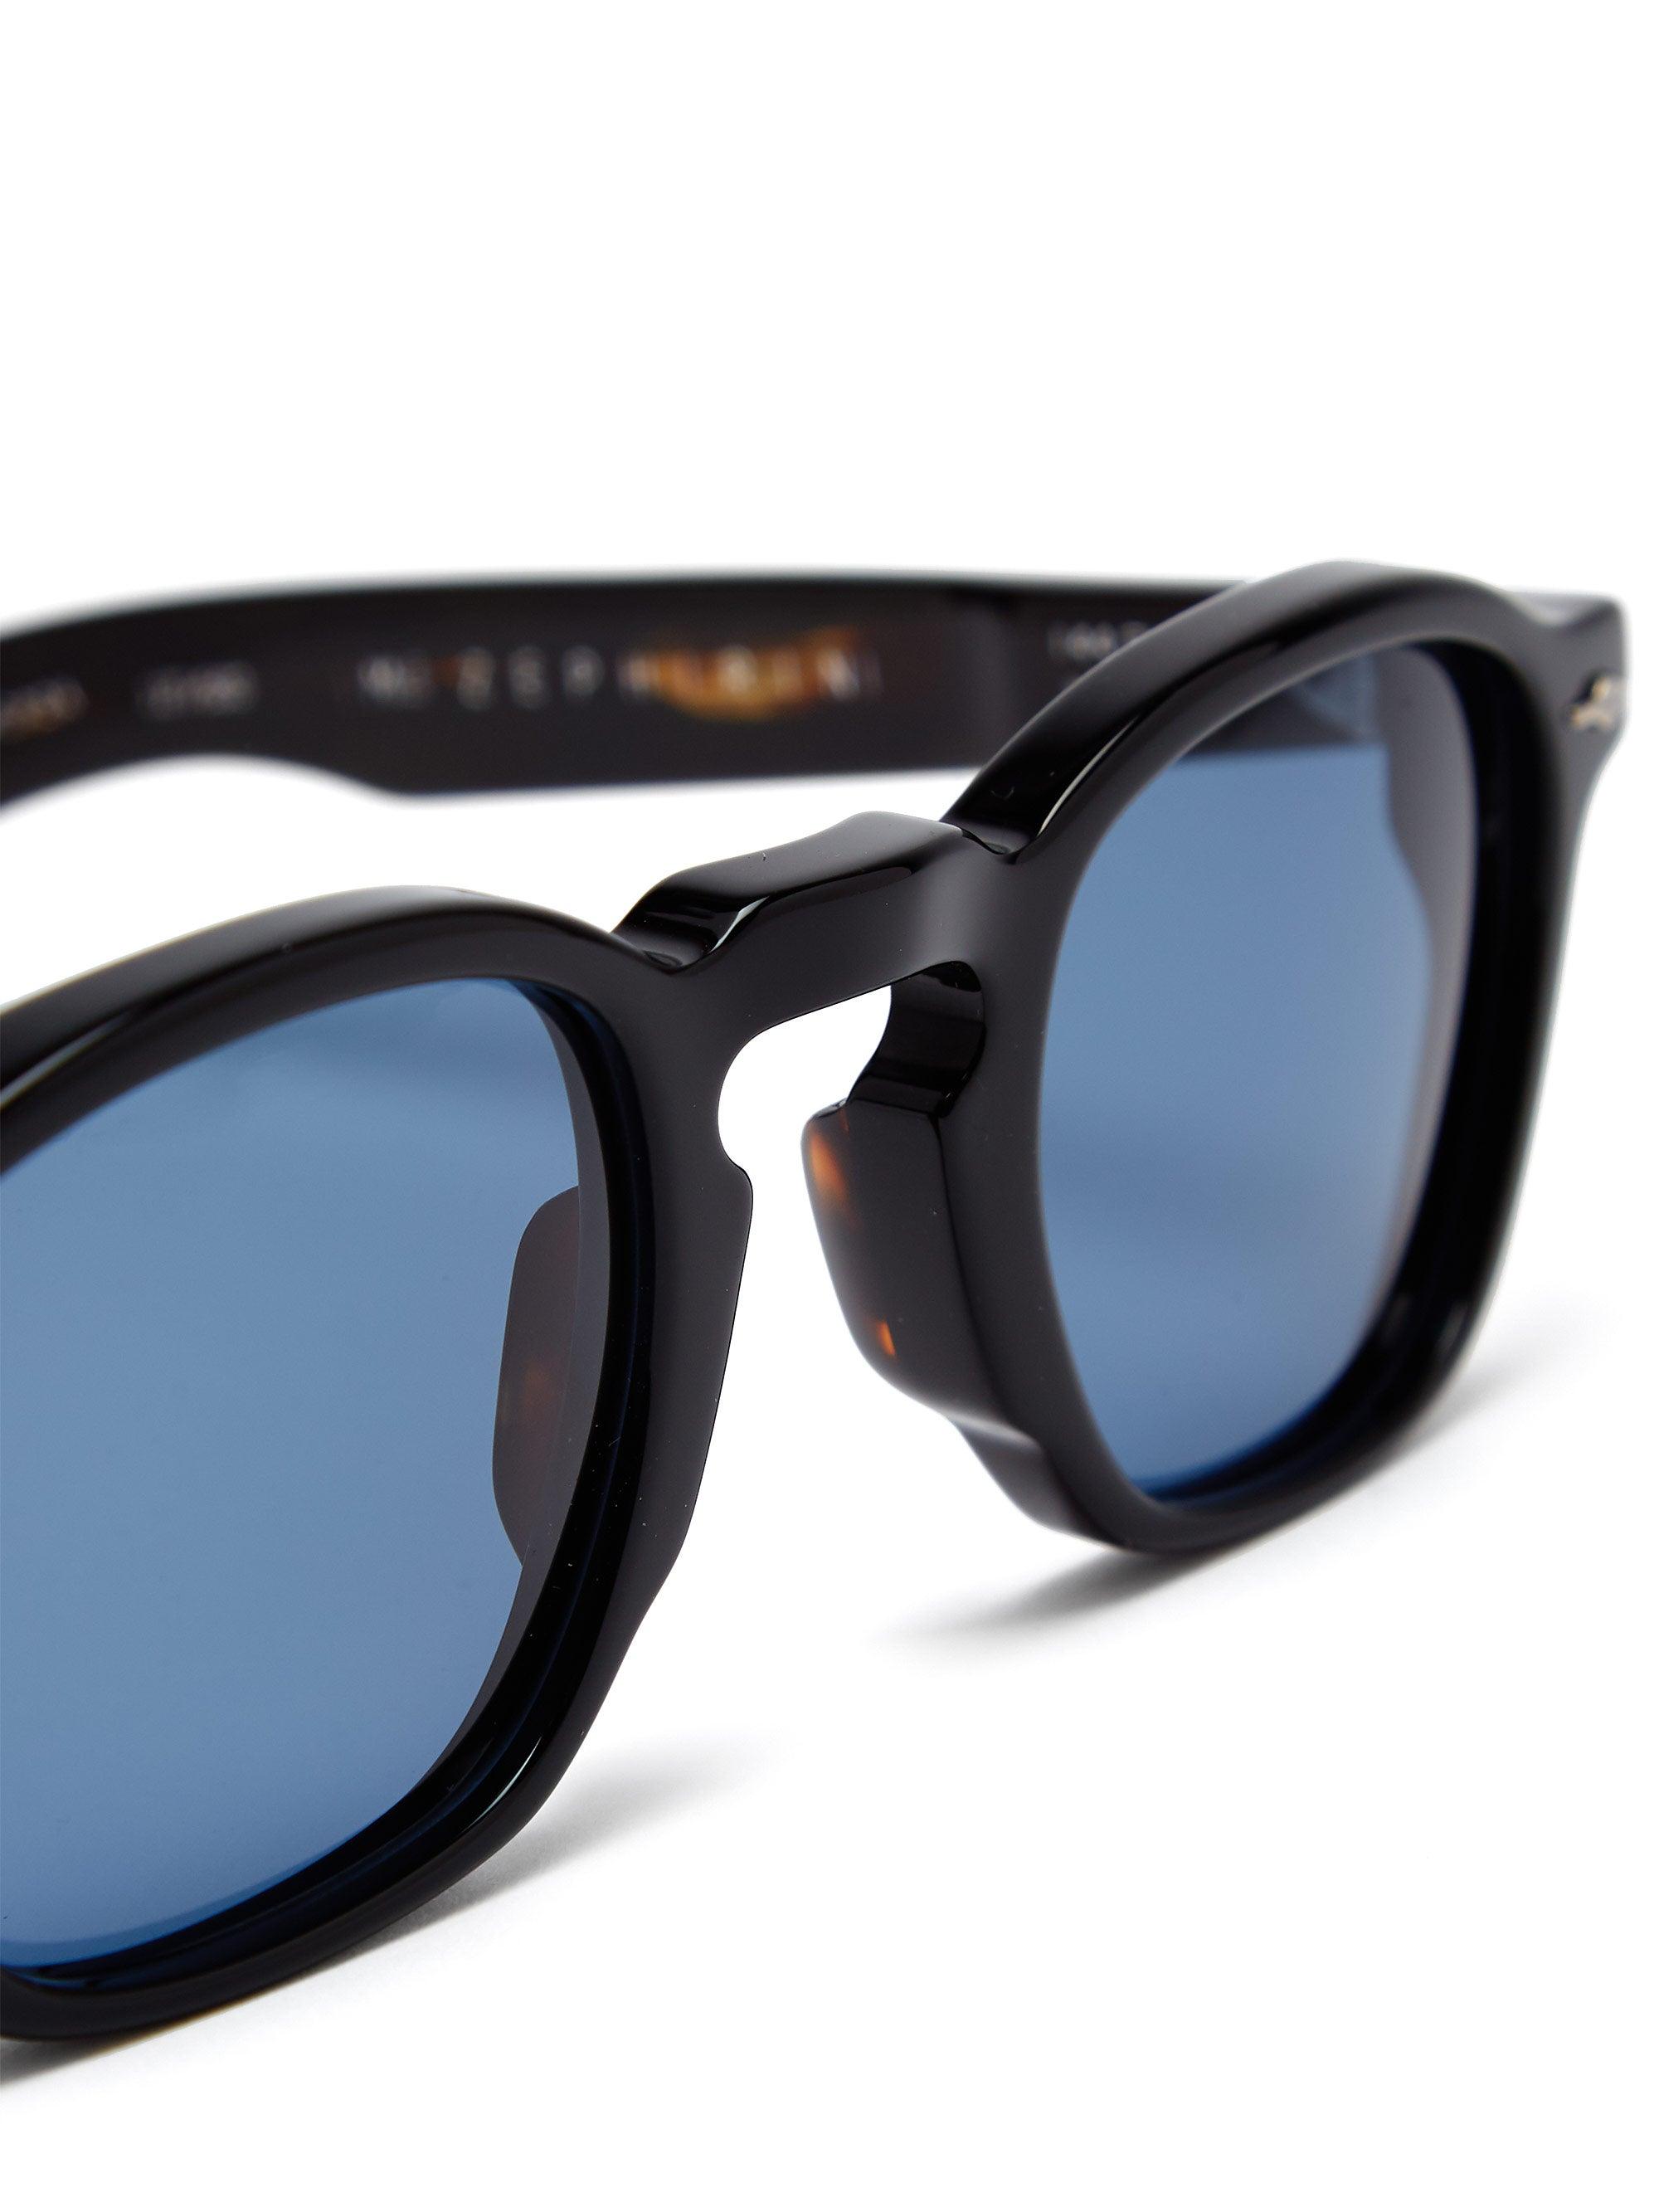 Jacques Marie Mage Zephirin Square Acetate Sunglasses in Black for 